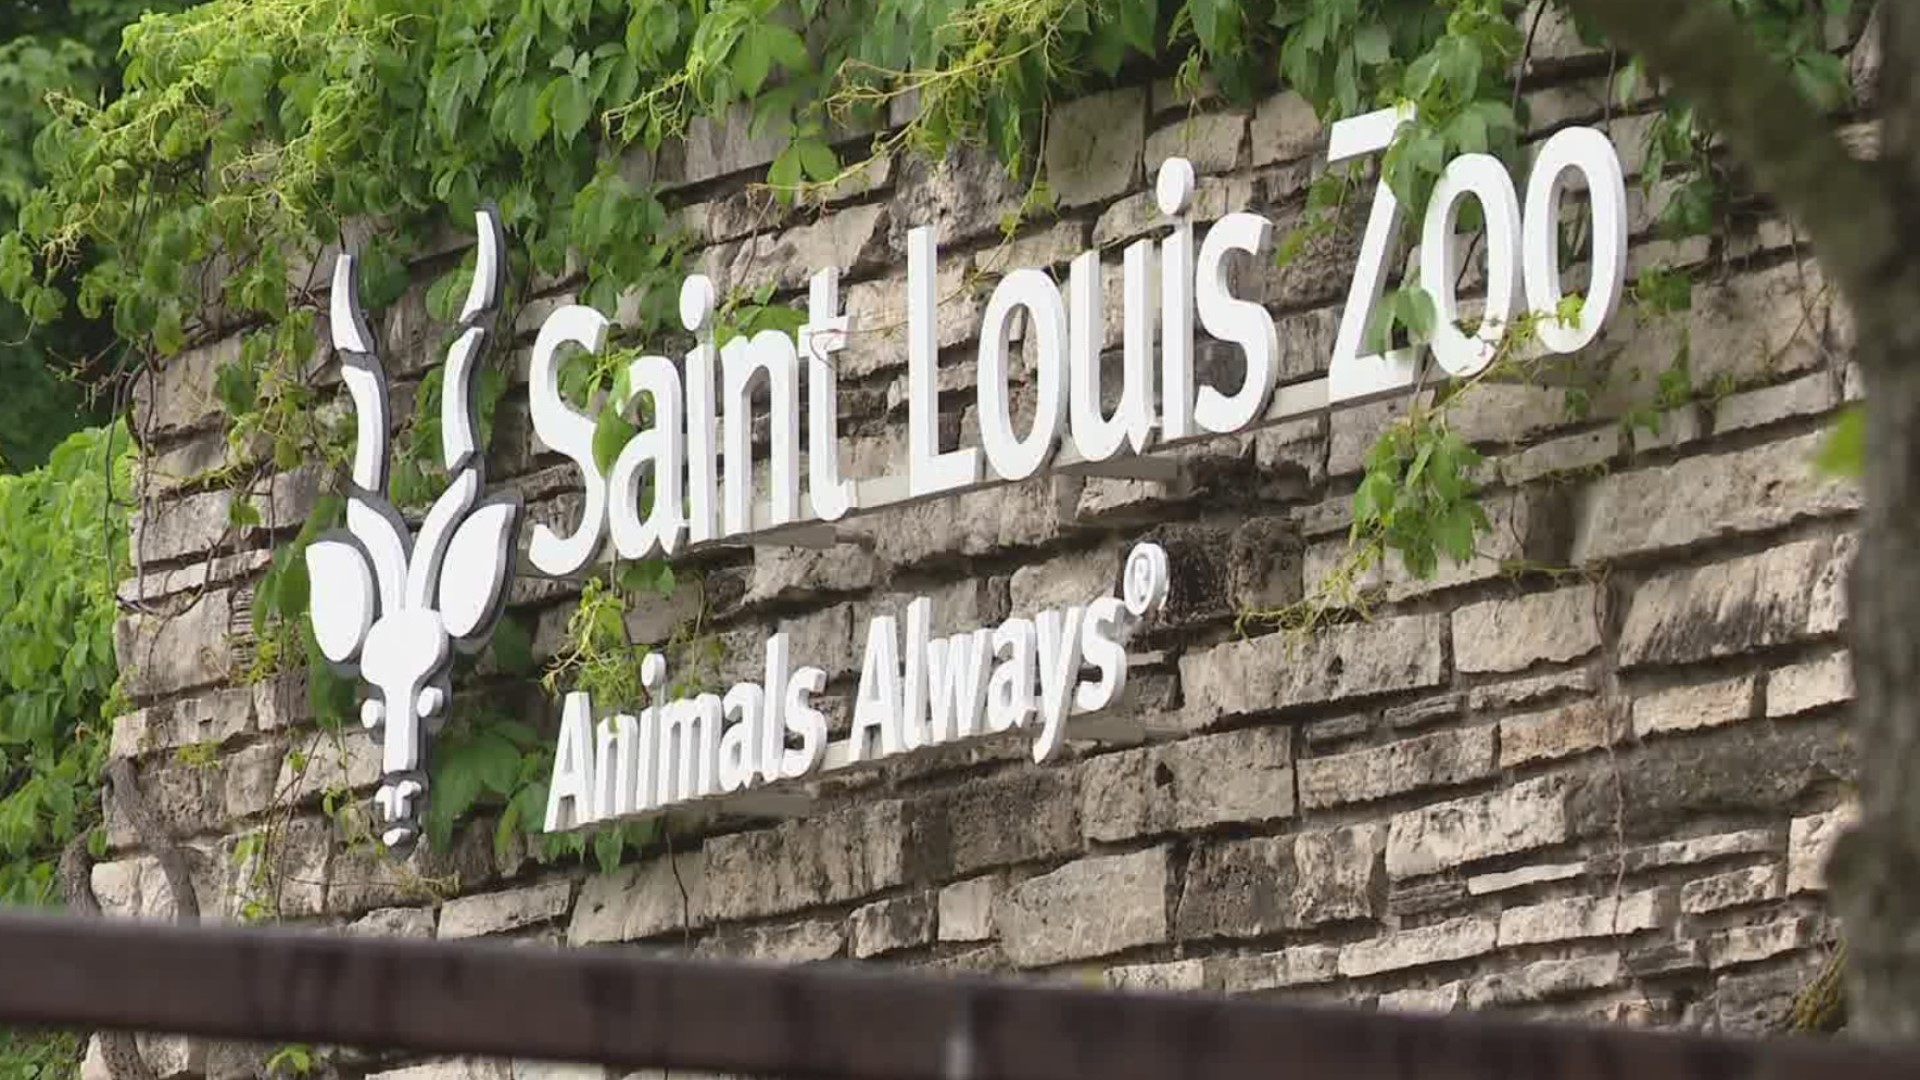 The Saint Louis Zoo is offering flexible weekday and weekend positions for those ages 15 and up.